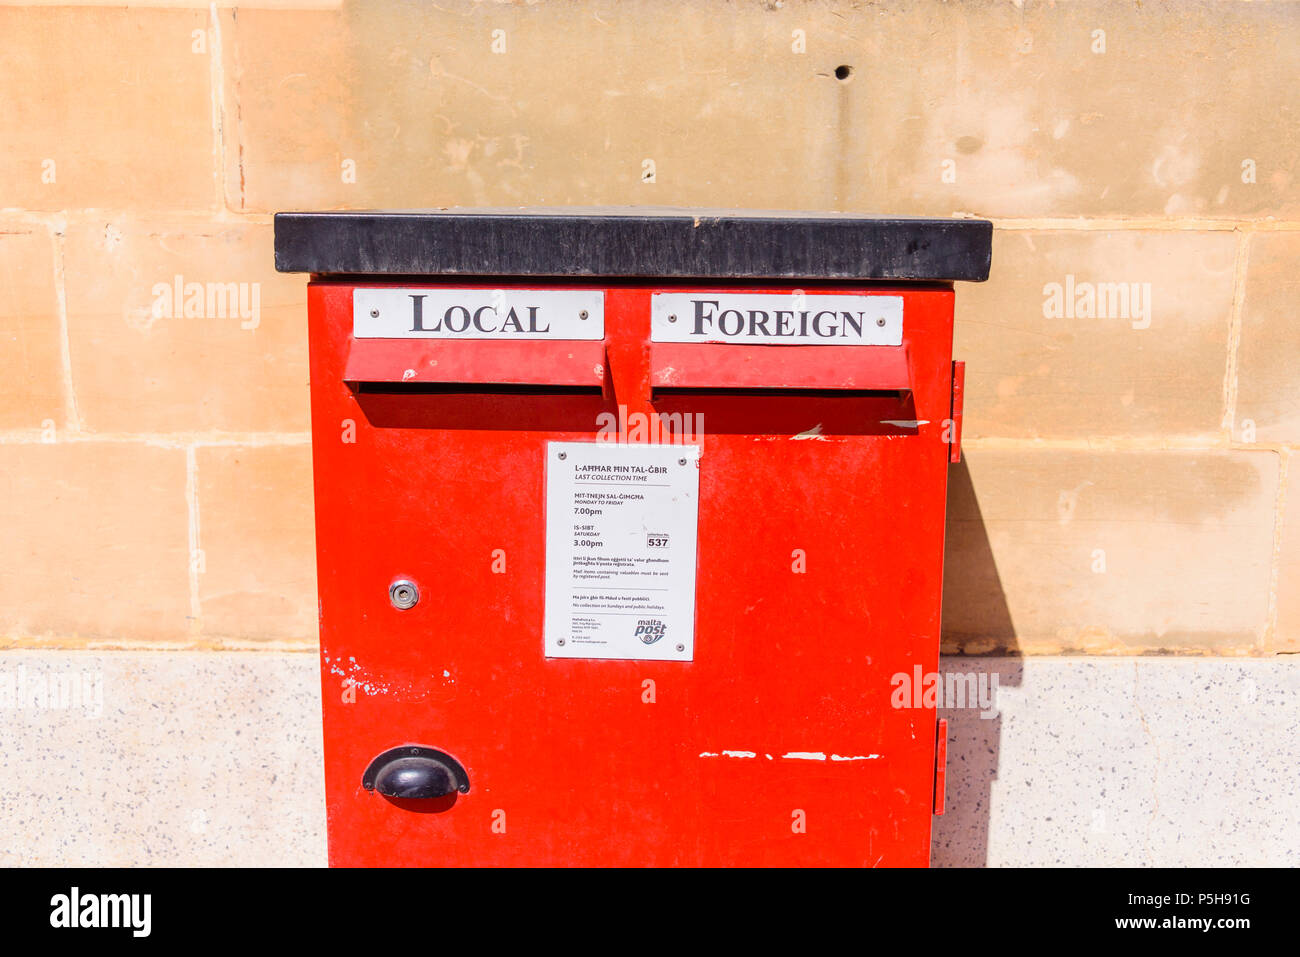 Red letterbox with slots for local and foreign mail and collection times from Malta Post. Stock Photo